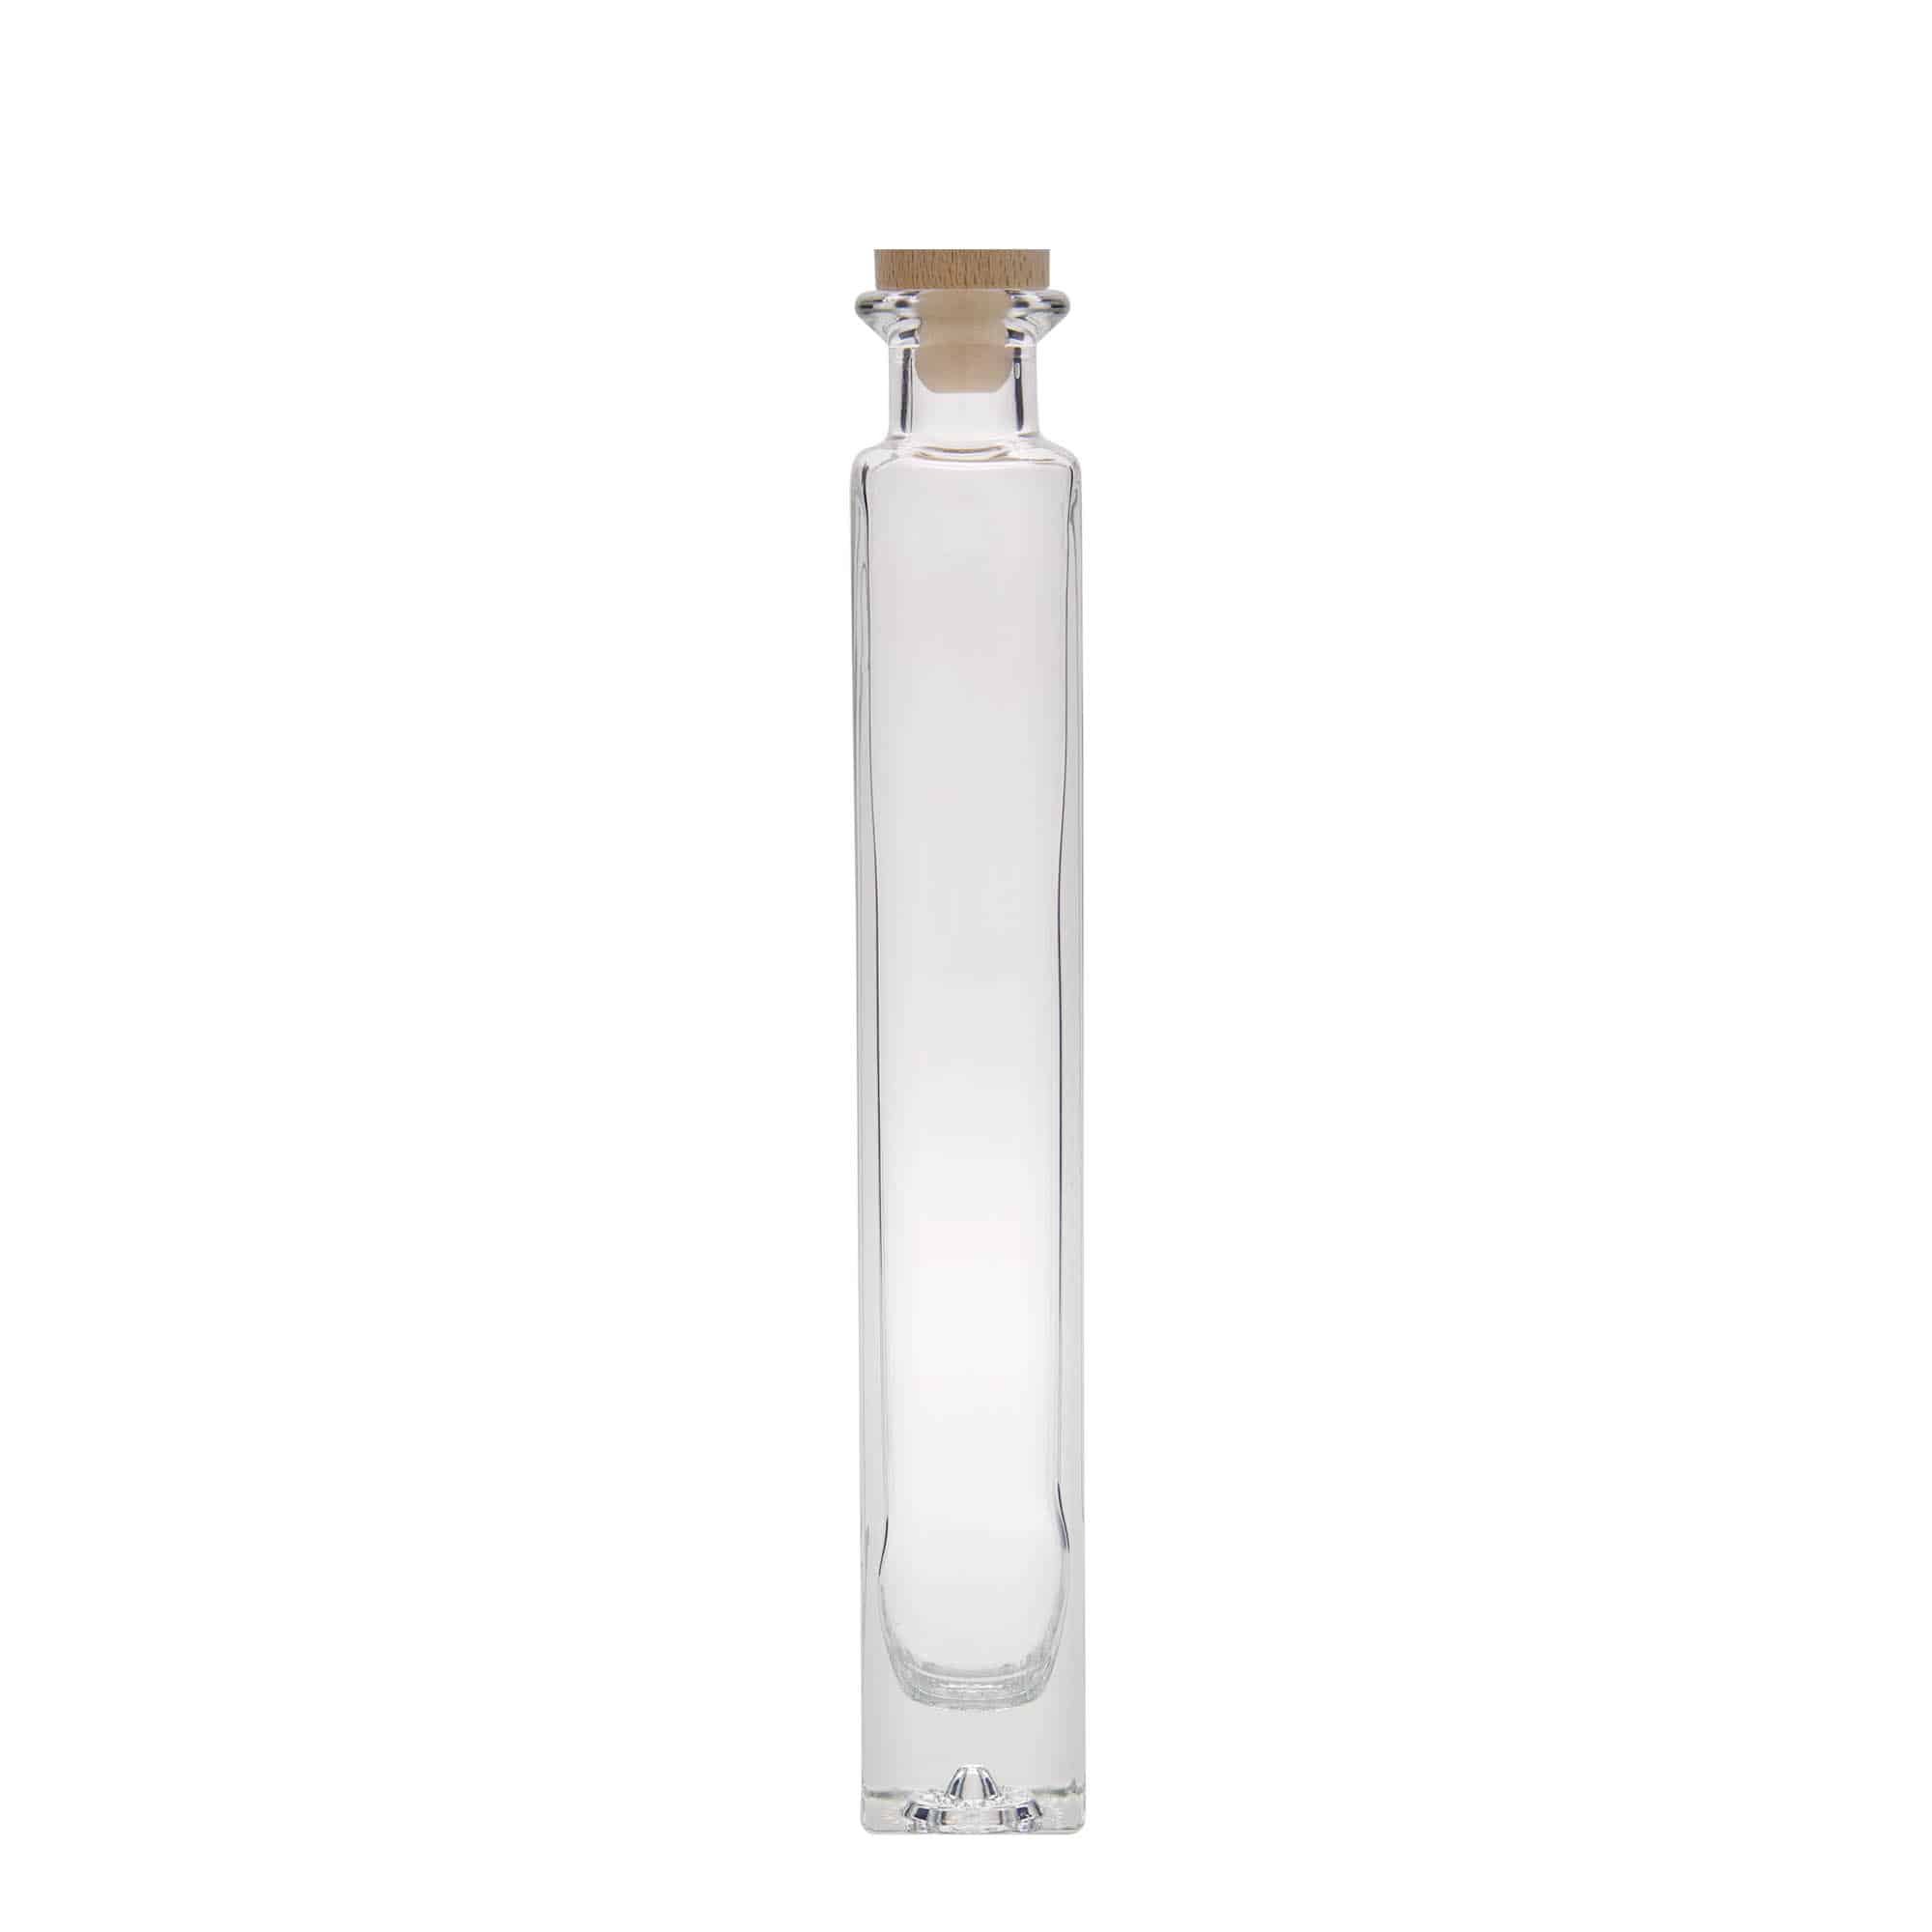 200 ml glass bottle 'Tommy', square, closure: cork